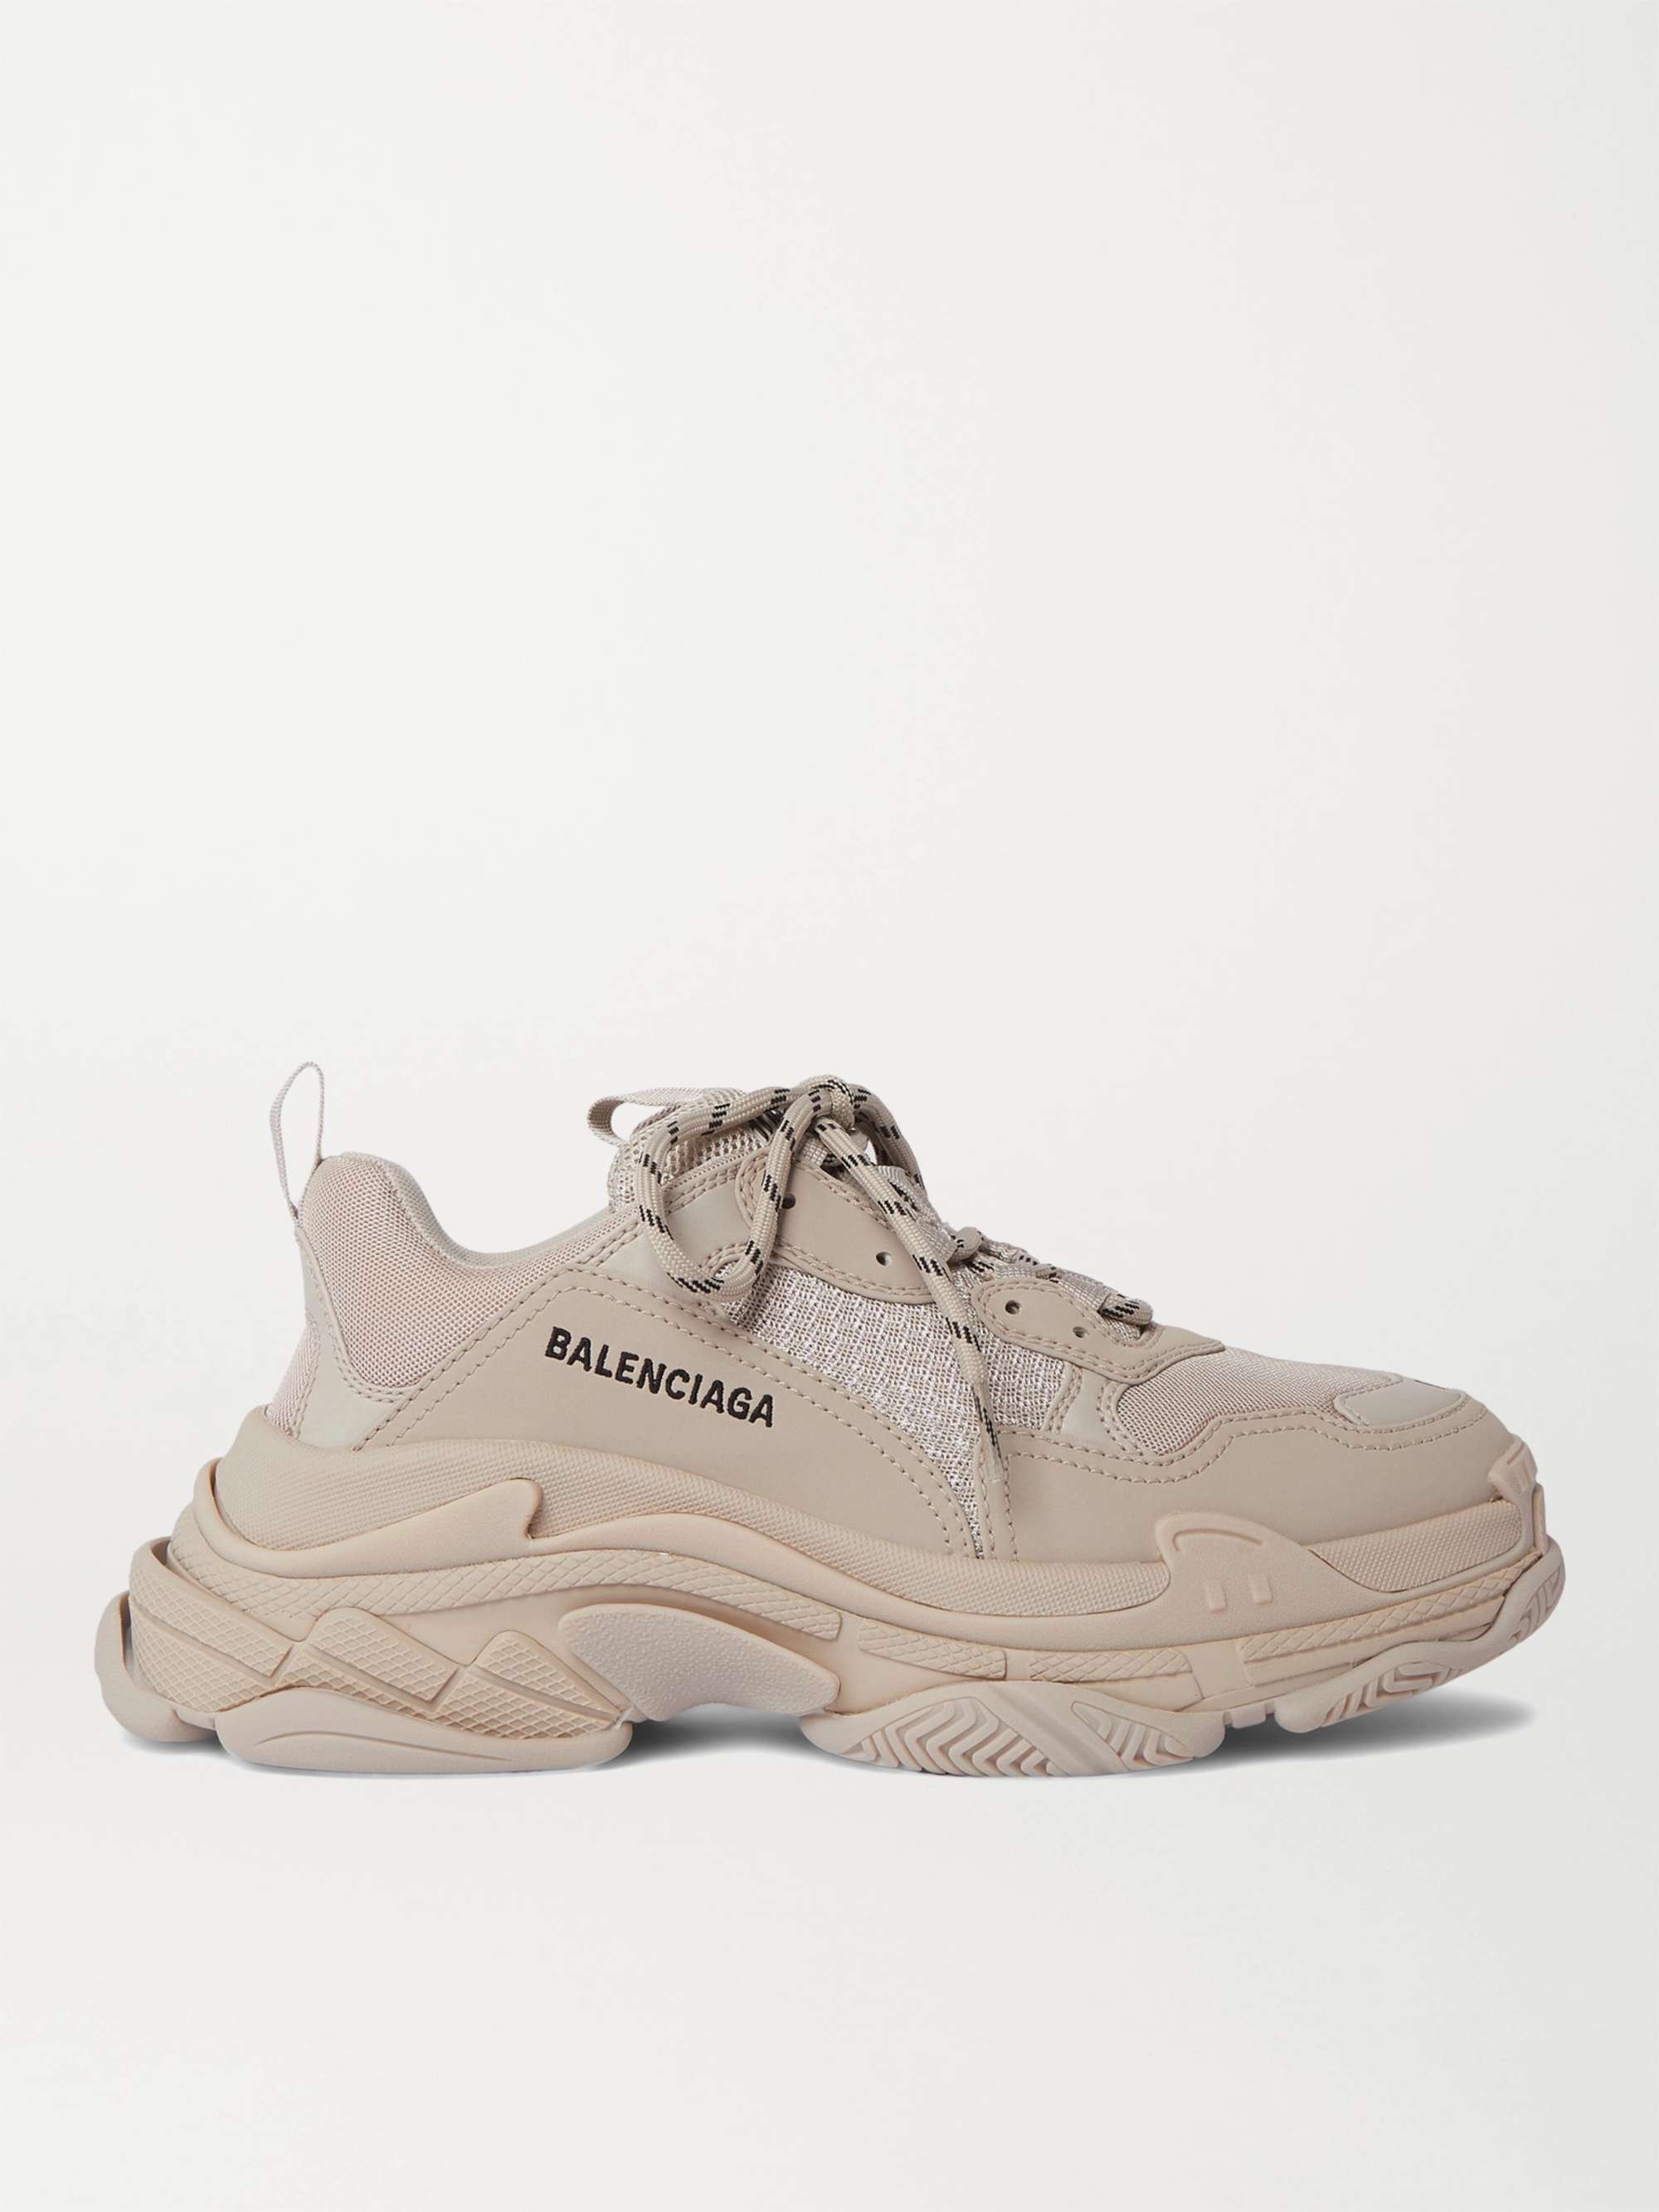 Beige Triple S Mesh and Faux Leather Sneakers | BALENCIAGA | MR PORTER